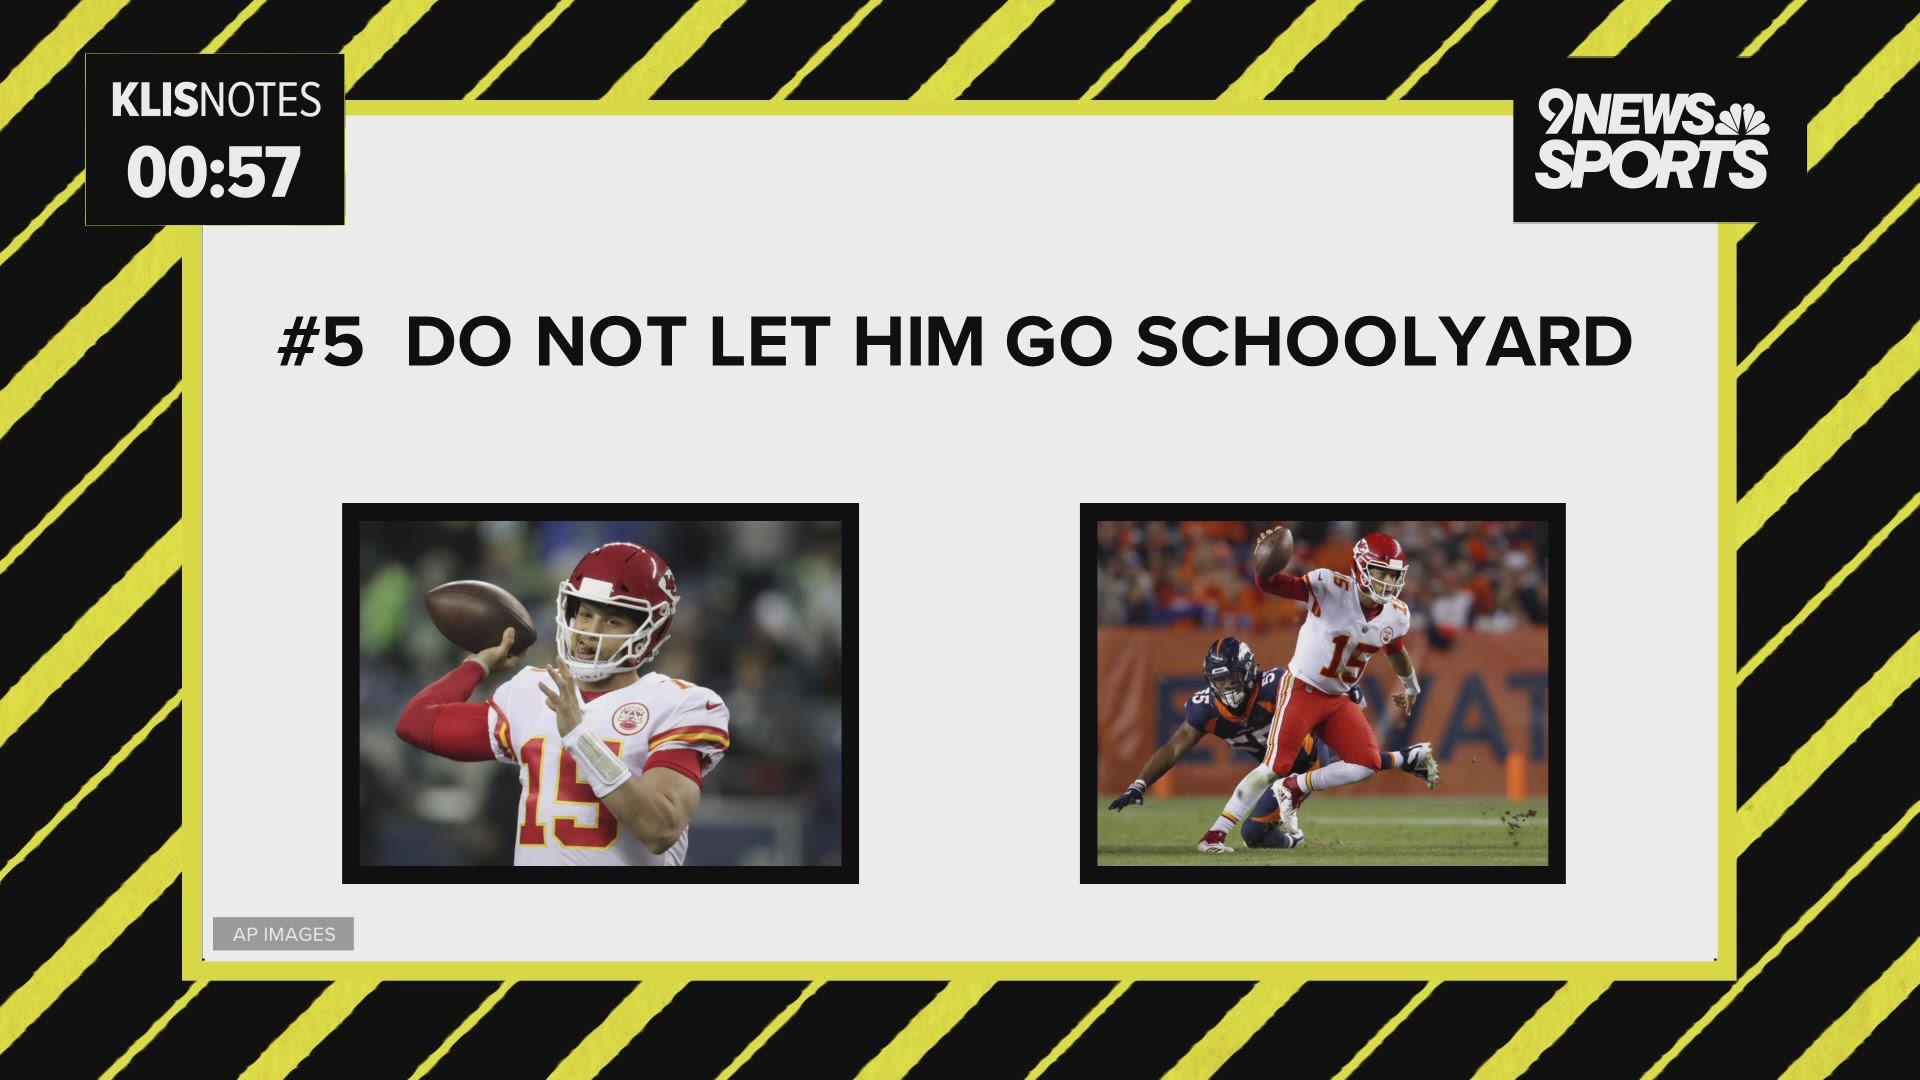 Start with keep Patrick Mahomes II from improvising. He is most dangerous when he draws up plays in the dirt.